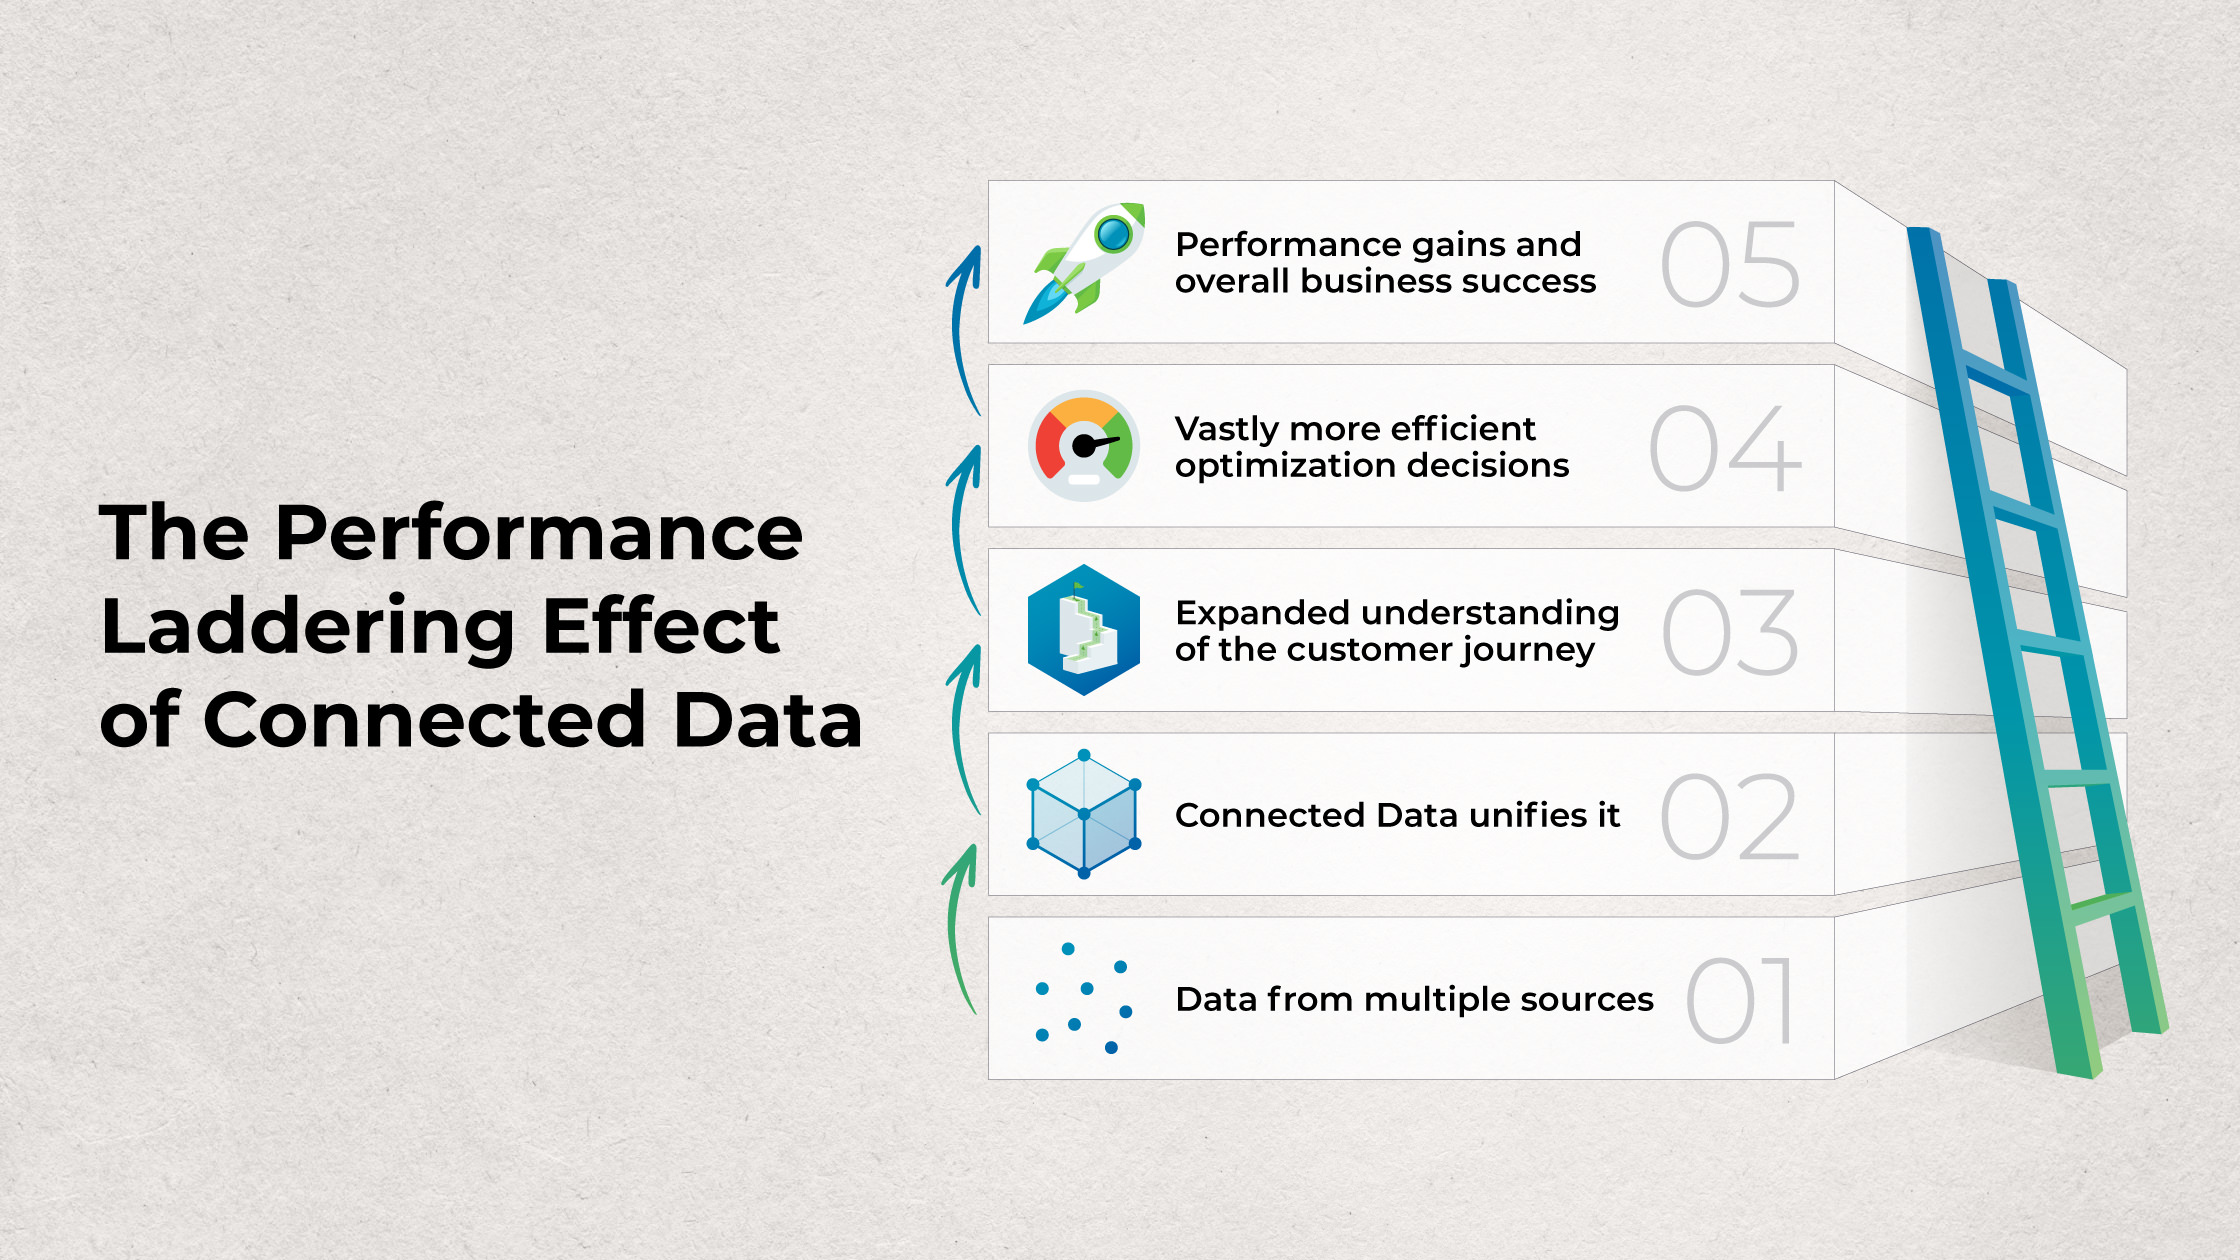 The Performance Laddering Effect of Connected Data